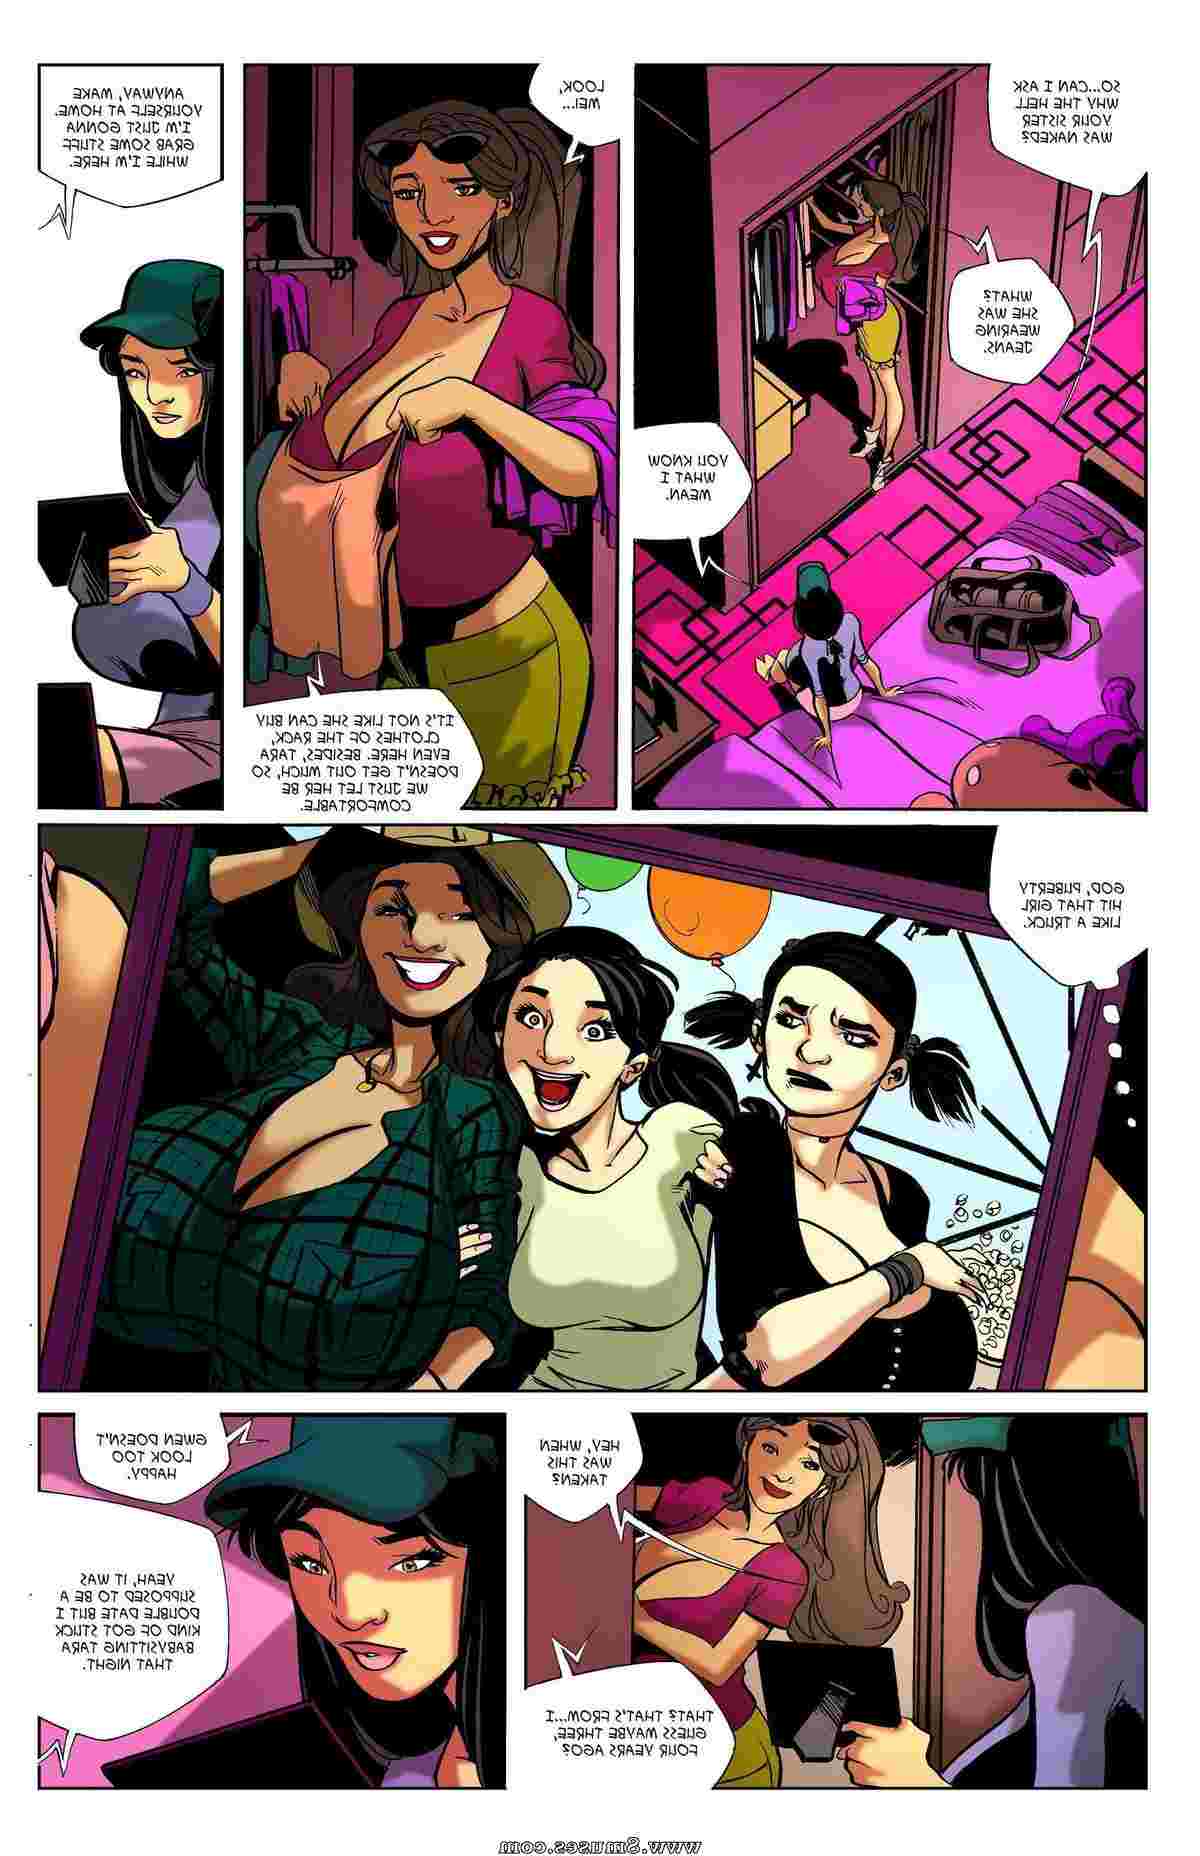 BE-Story-Club-Comics/Welcome-to-Chastity Welcome_to_Chastity__8muses_-_Sex_and_Porn_Comics_59.jpg